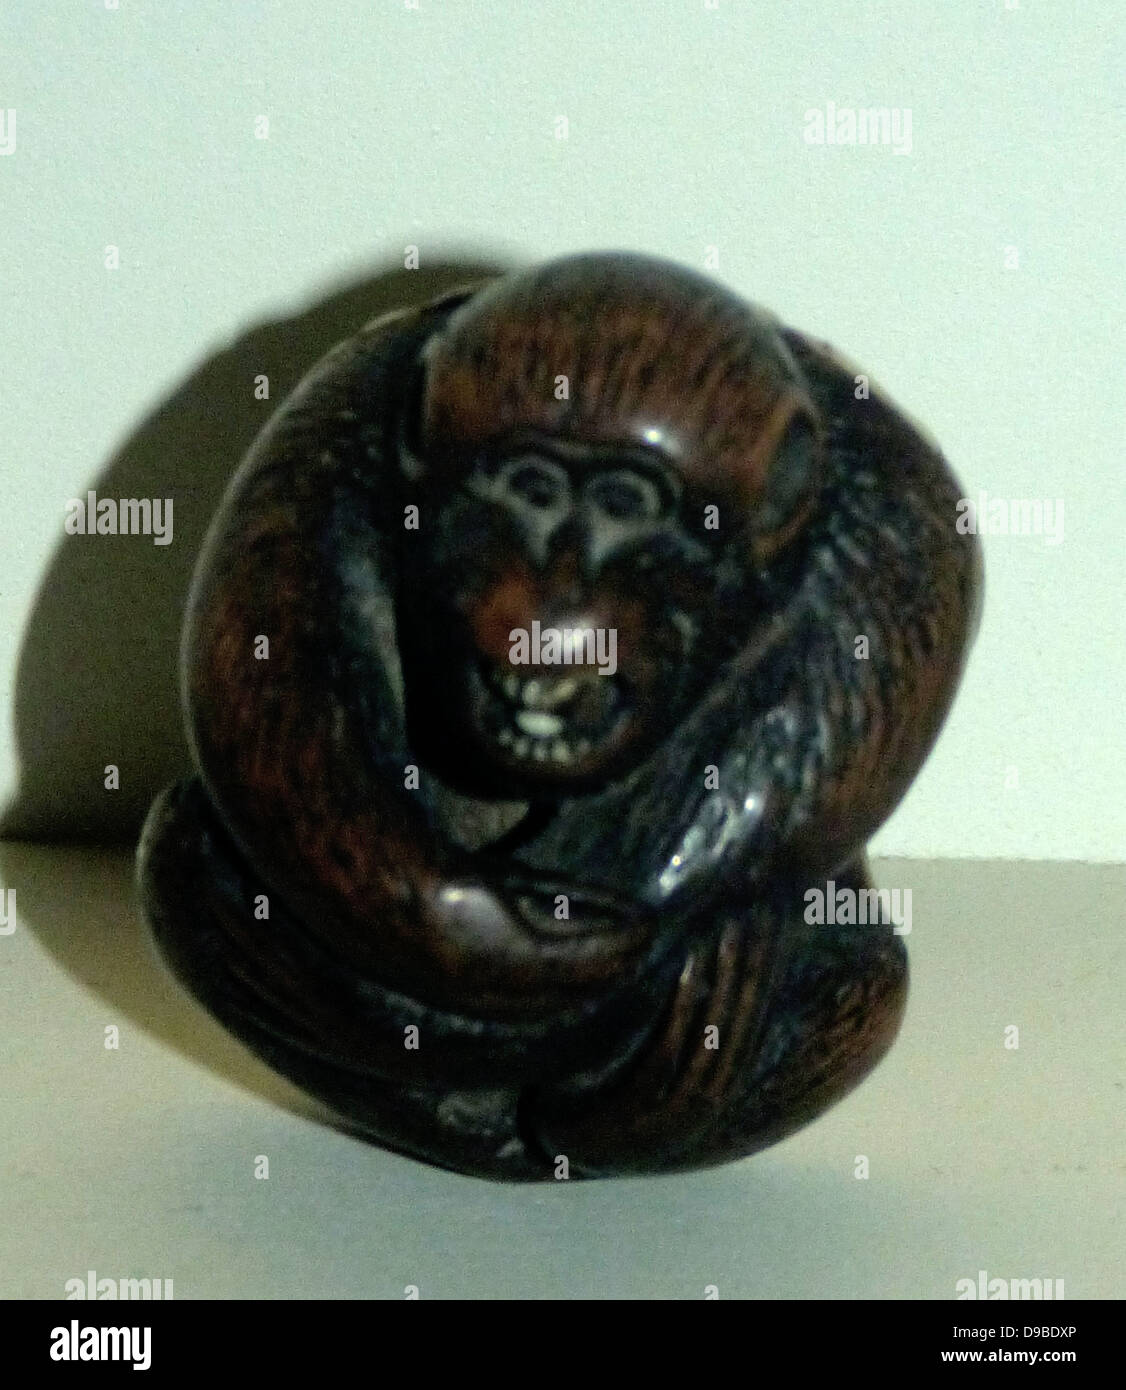 Monkey, signed Koku(sai) (a highly original and inventive carver) and Miwa (maker). Carved wood and ivory. Japan. Stock Photo